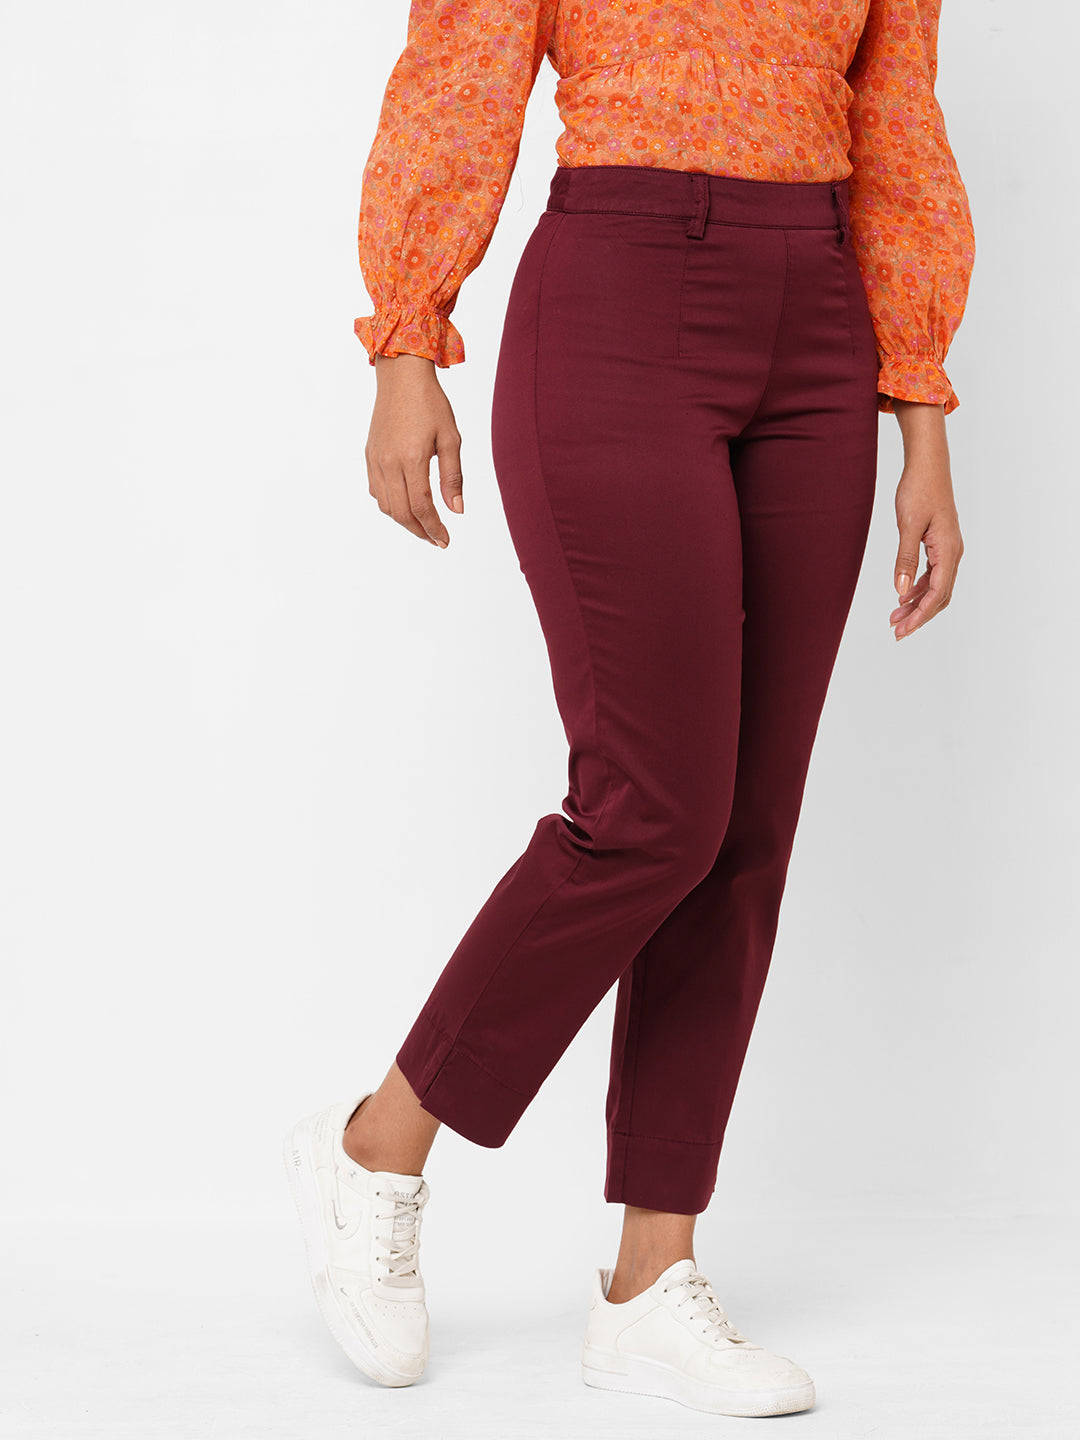 15 Ways to Wear Burgundy or Maroon Pants | Maroon pants, Cute outfits,  Business casual outfits